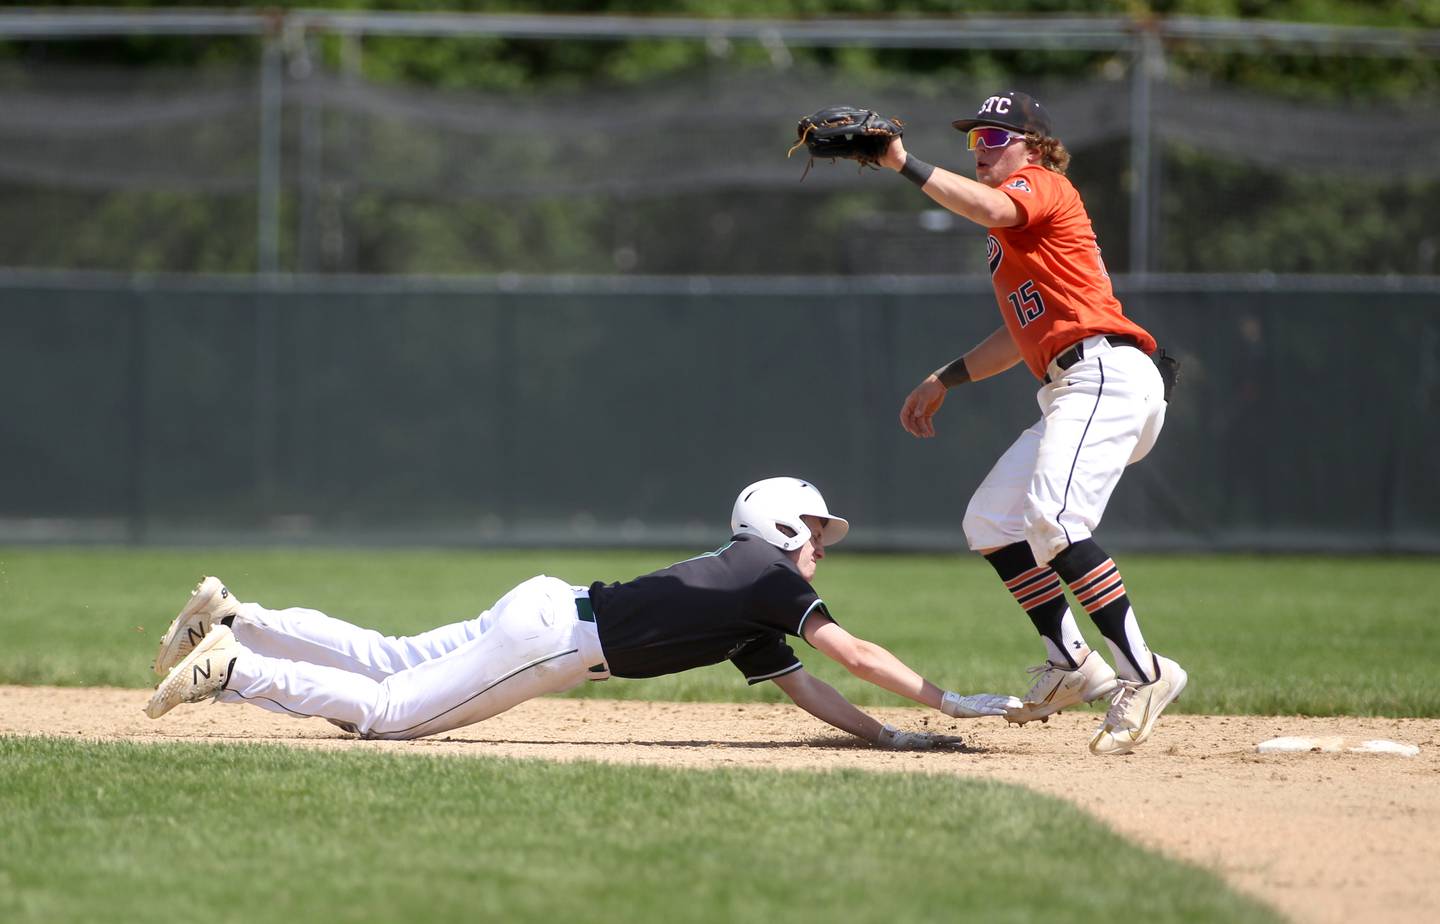 Glenbard West’s Danny Nash slides back into second base as St. Charles East’s Seth Winkler gets the out during the Class 4A Glenbard West Regional final in Glen Ellyn on Saturday, May 28, 2022.